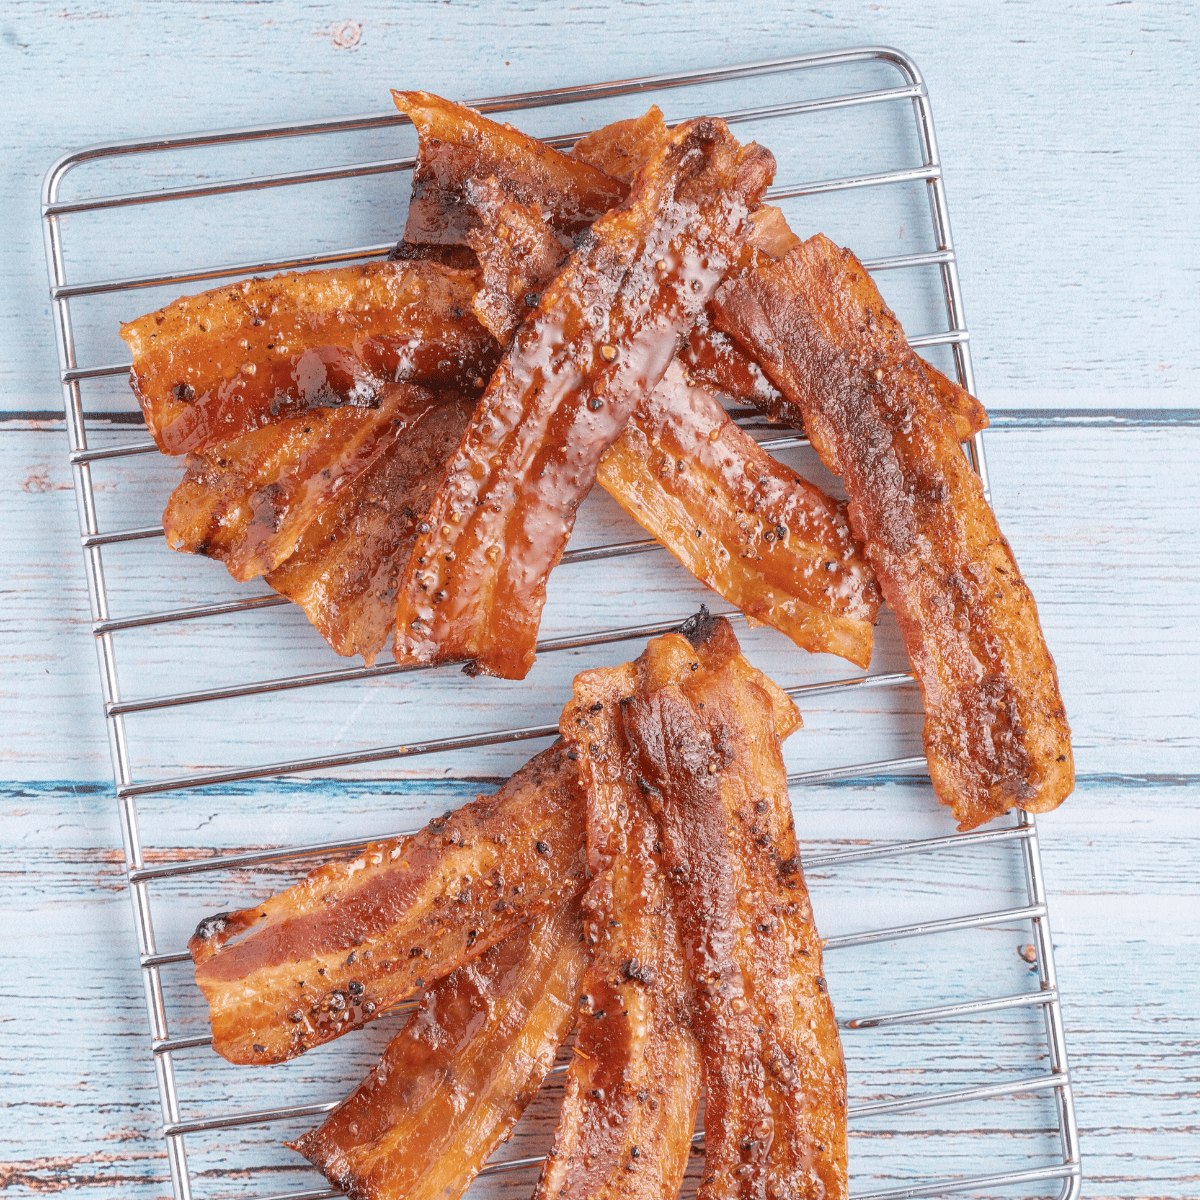 https://forktospoon.com/wp-content/uploads/2021/07/Air-Fryer-Brown-Sugar-Candied-Bacon.png